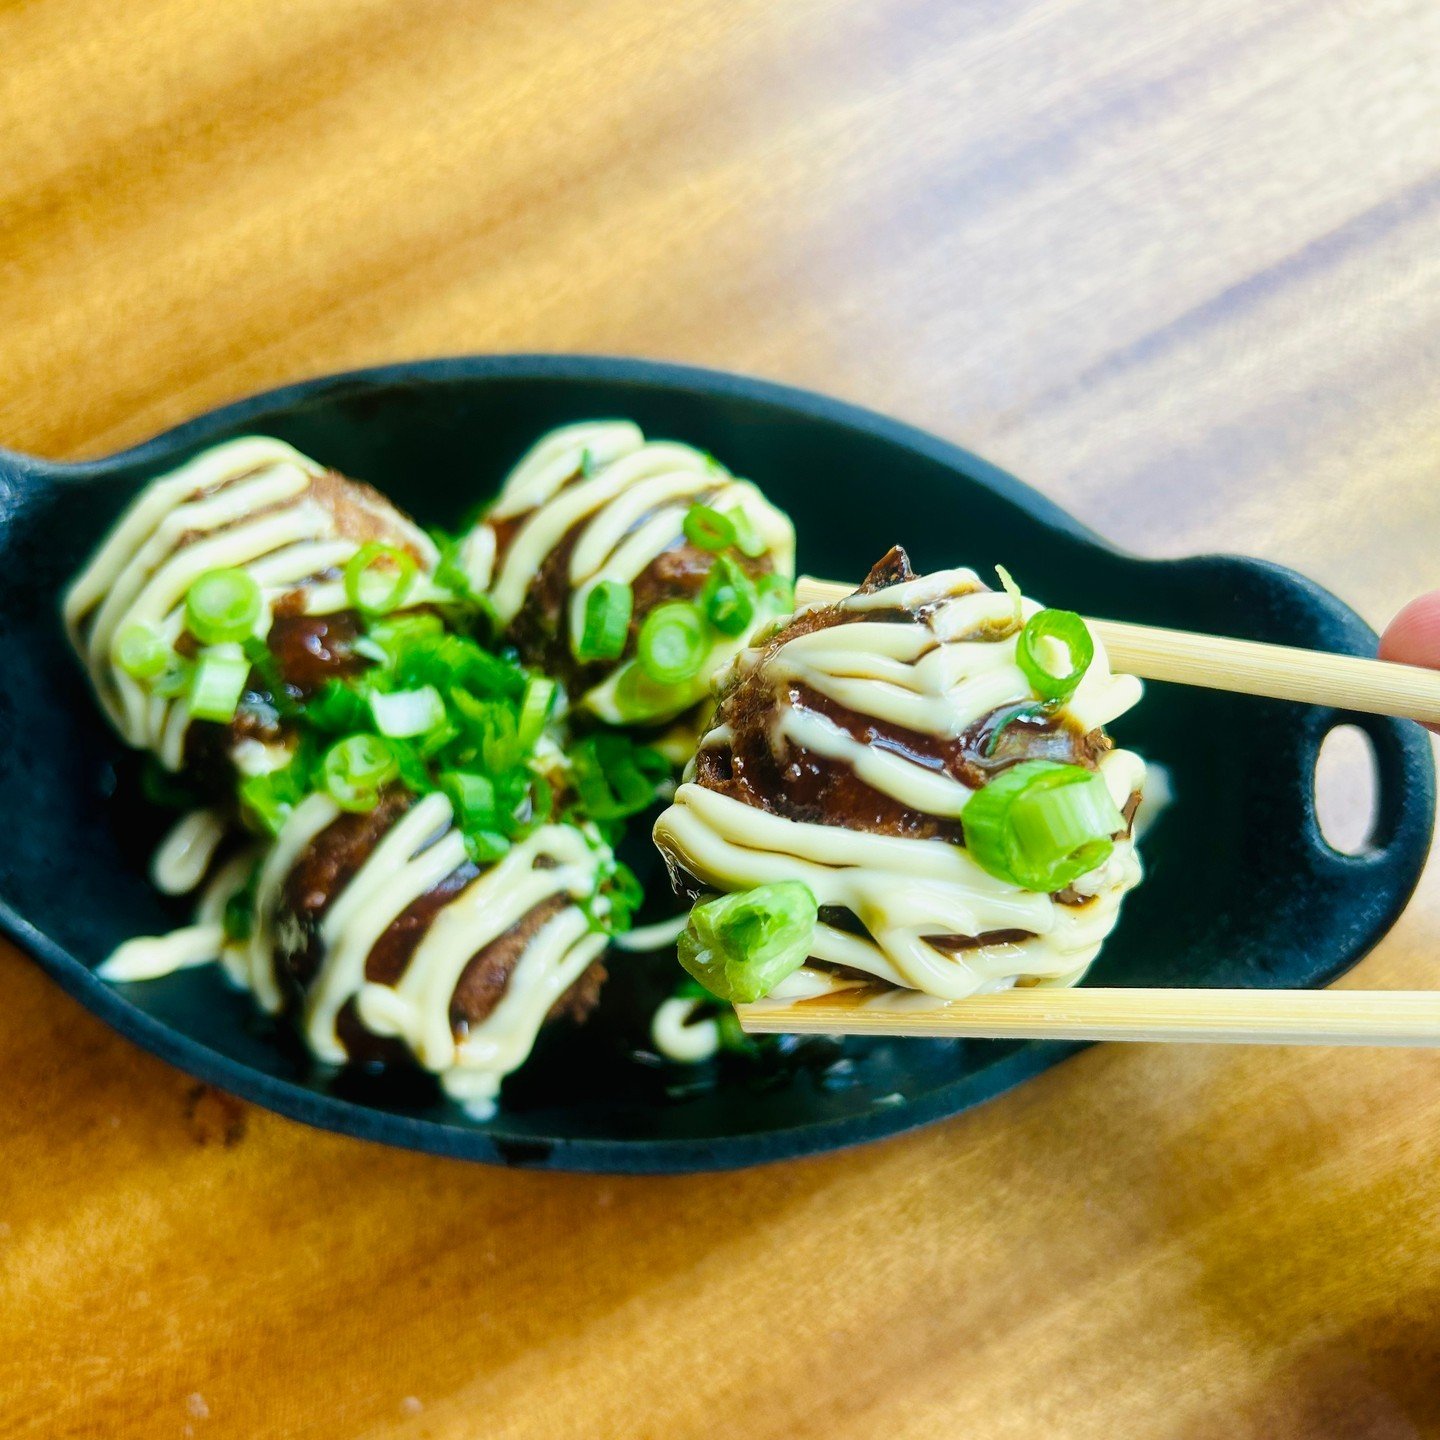 Our takoyaki hushpuppies are so good, you&rsquo;ll be coming back for round two ✌️😋 Made with octopus, scallions, kewpie, &amp; tonkatsu, these yummy bites pair perfectly with a pint! 🐙🍺